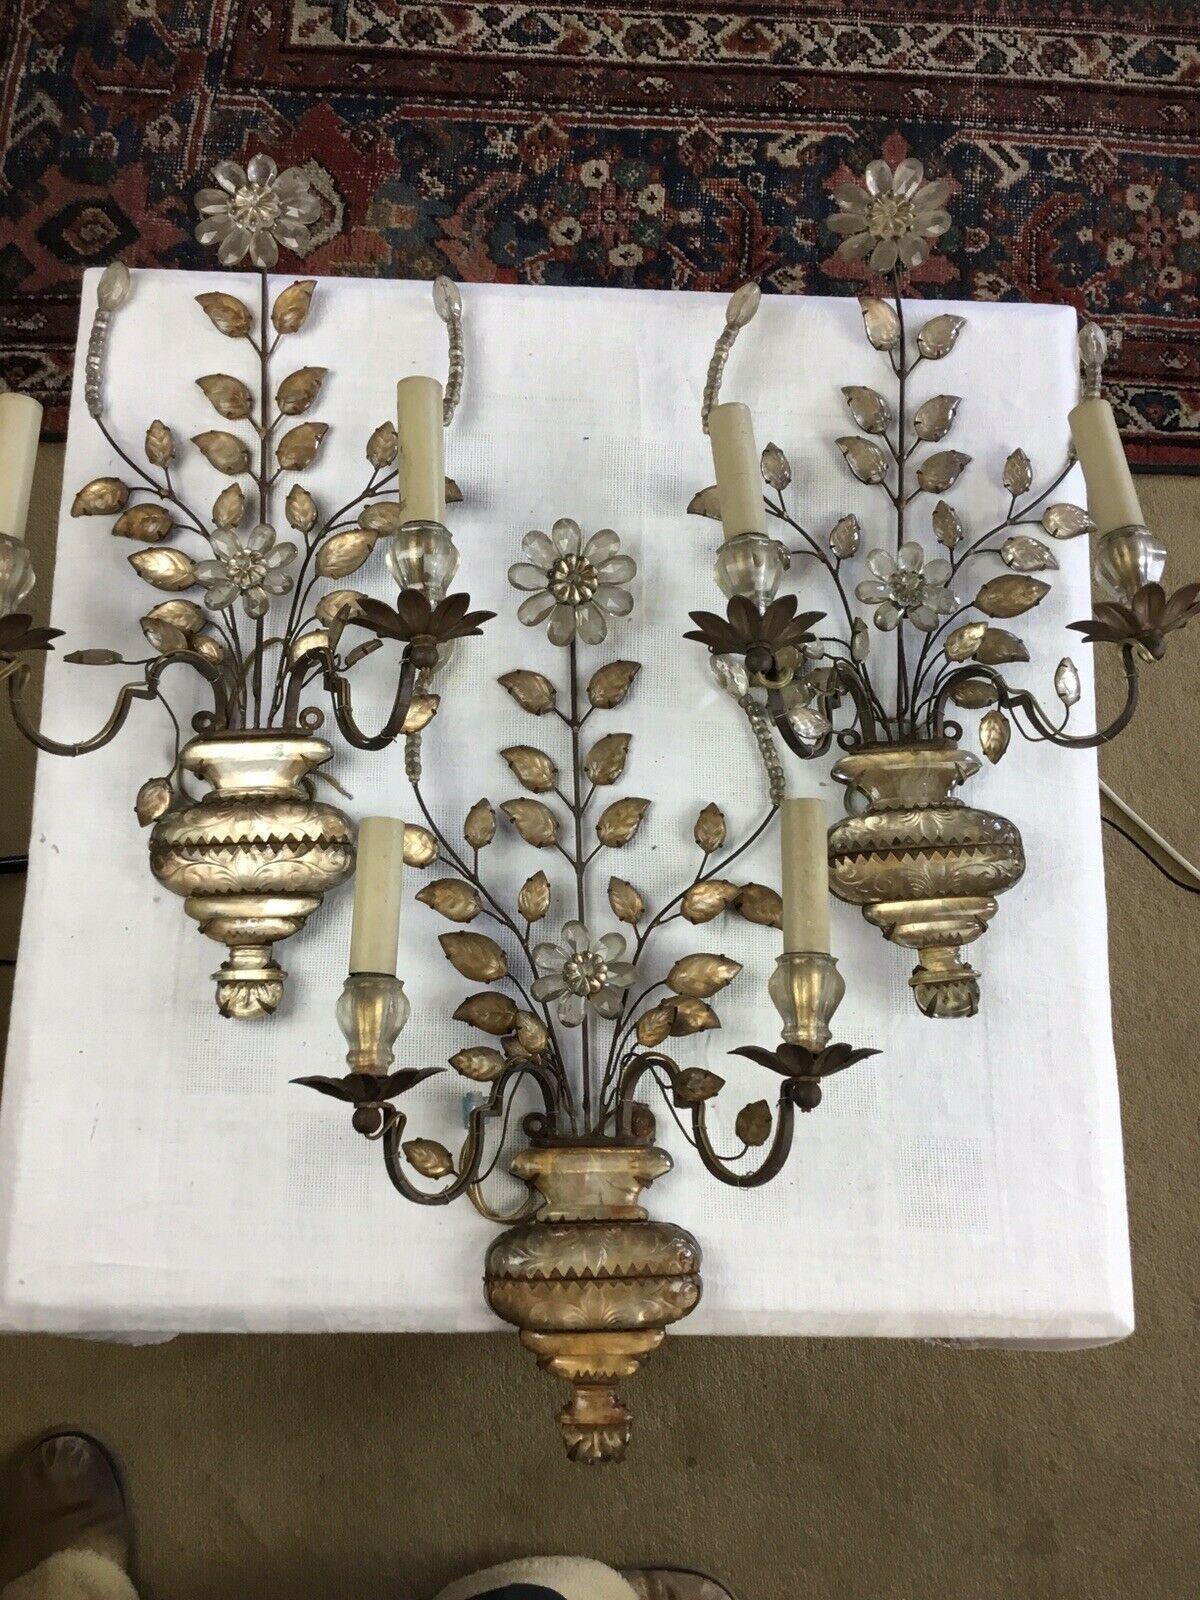 Set of 3 1920's Matching French Art Deco Crystal Floral Form Wall Sconces by Maison Bagues Paris. Cut crystal flowers in vase. These sconces were sourced from a Hotel Liquidation where they were stored since the 1960s. Amazing set!